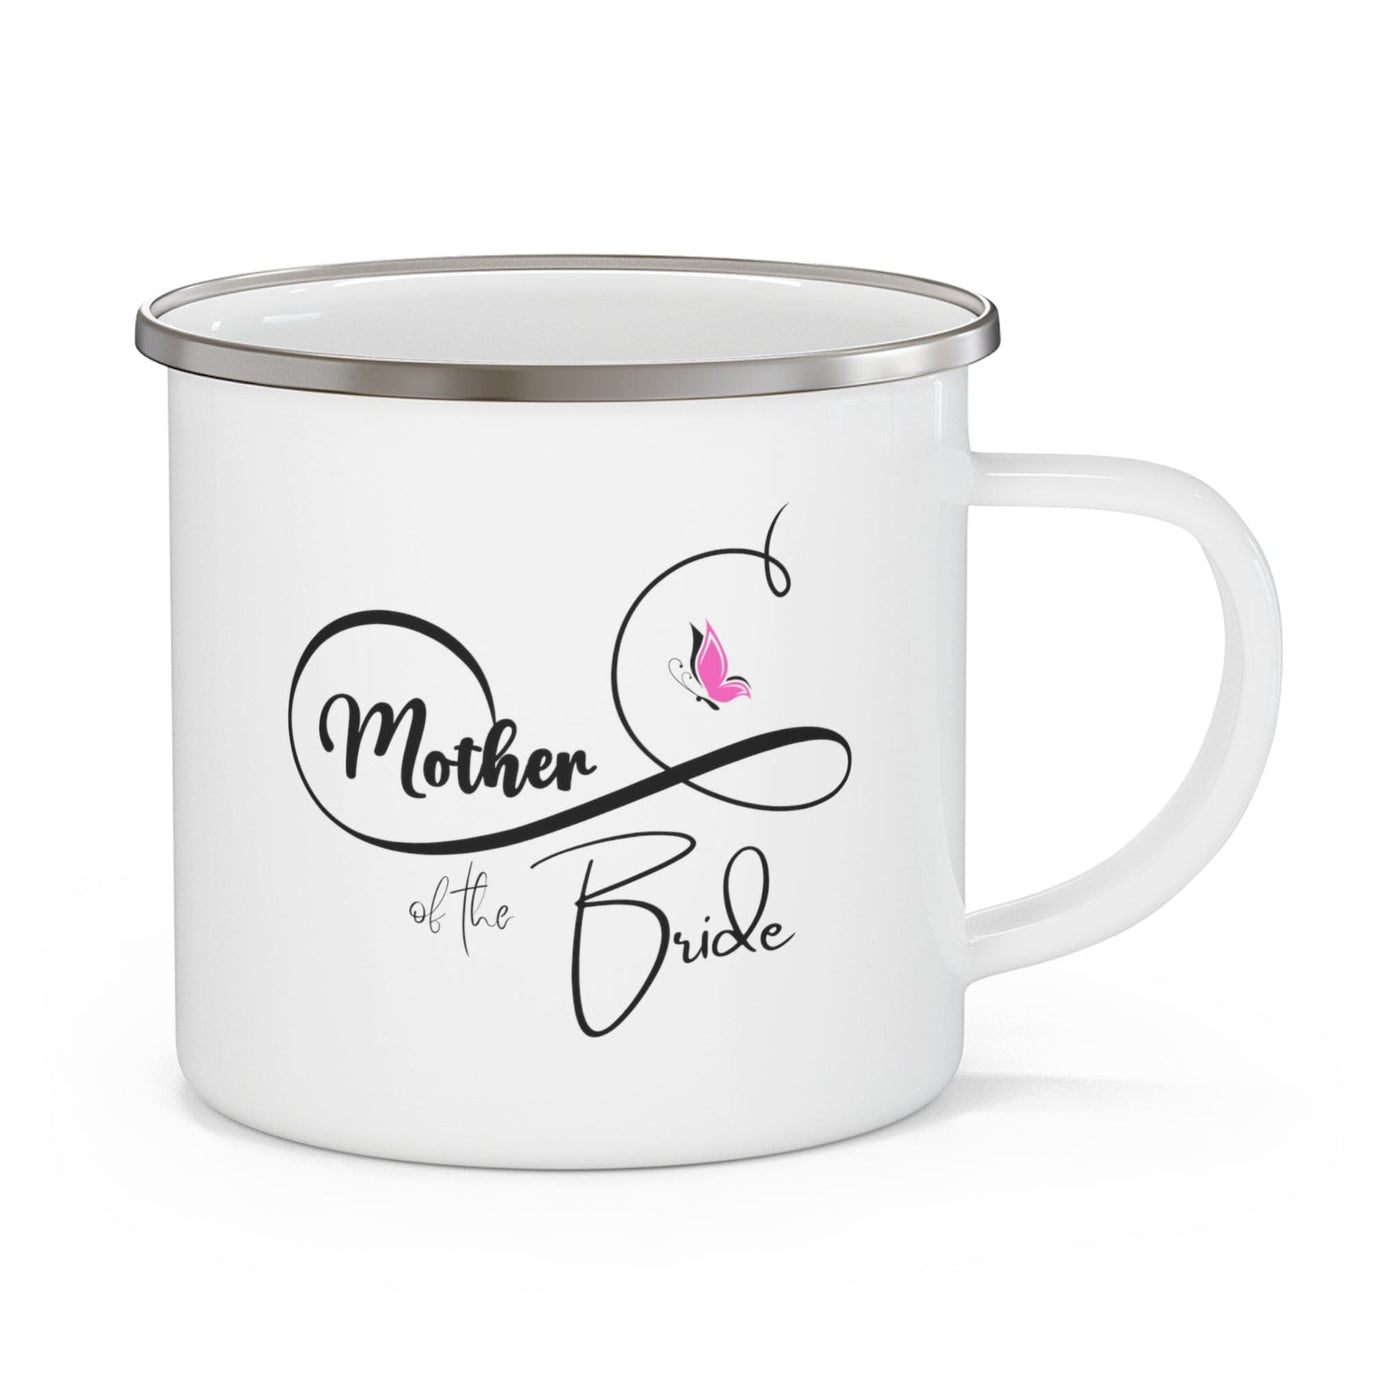 Enamel Camping Mug Mother Of The Bride - Wedding Bridal Pink Butterfly